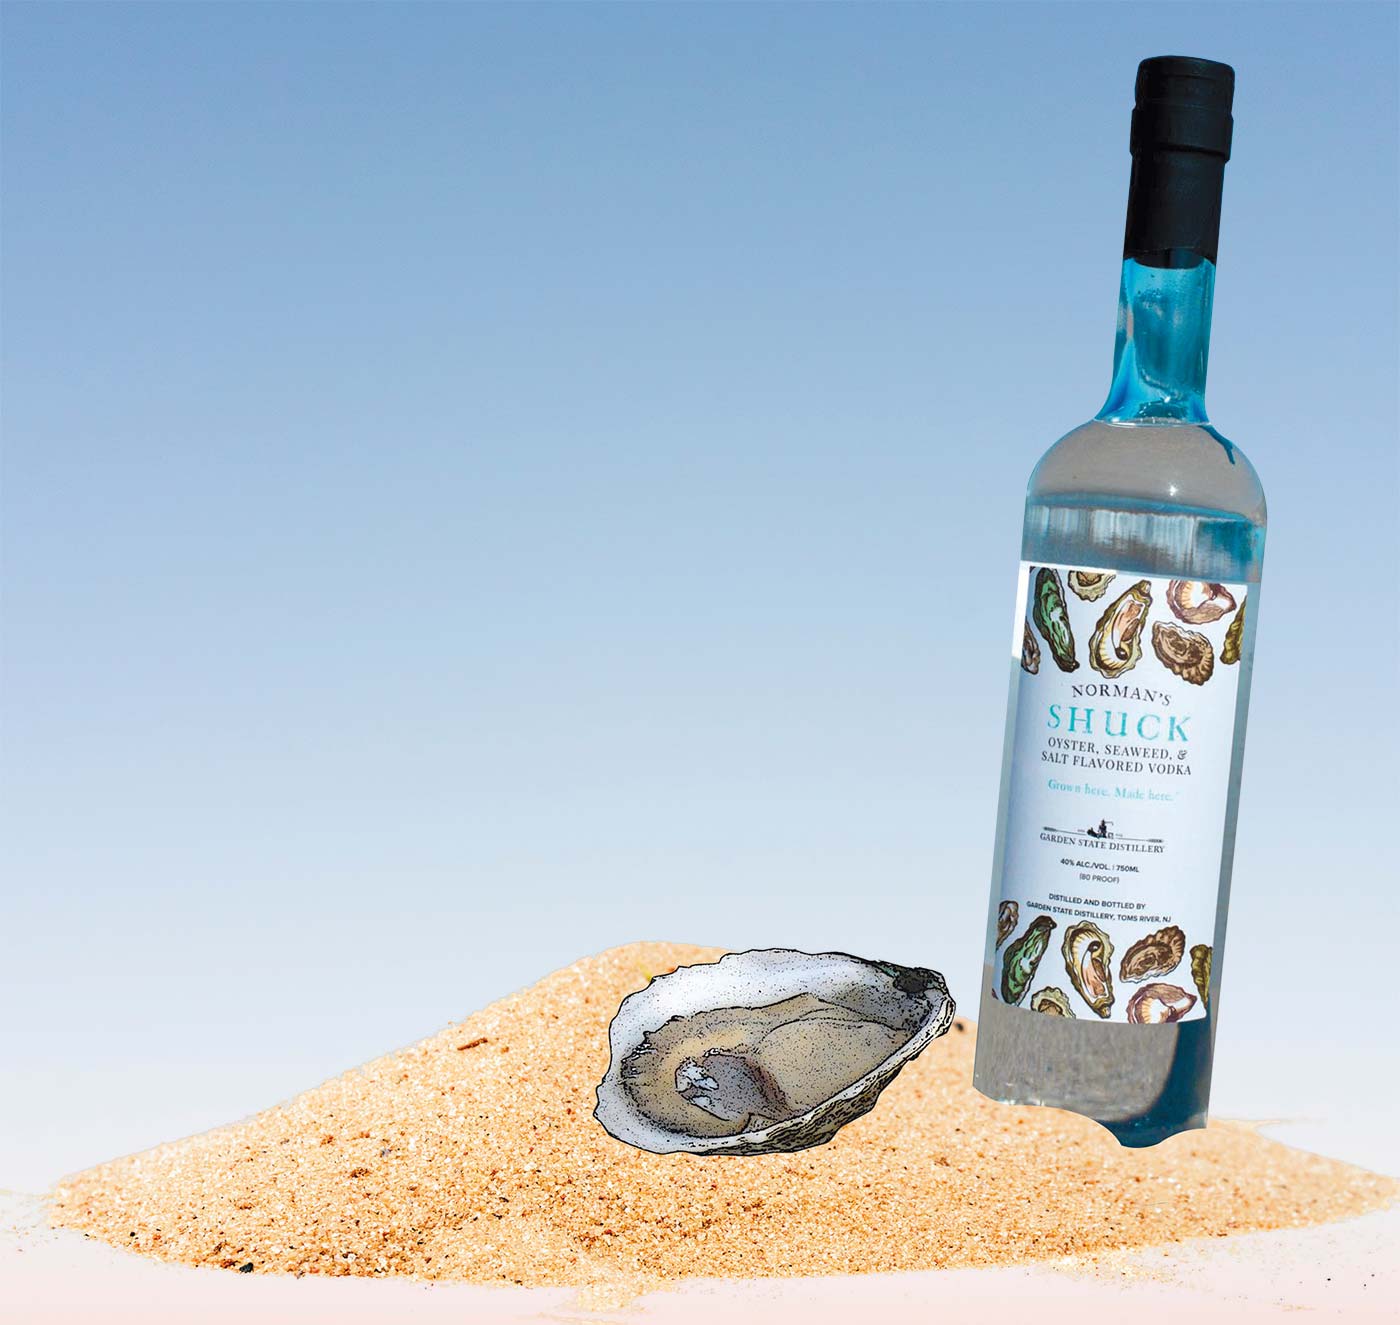 Norman’s Shuck Oyster Vodka